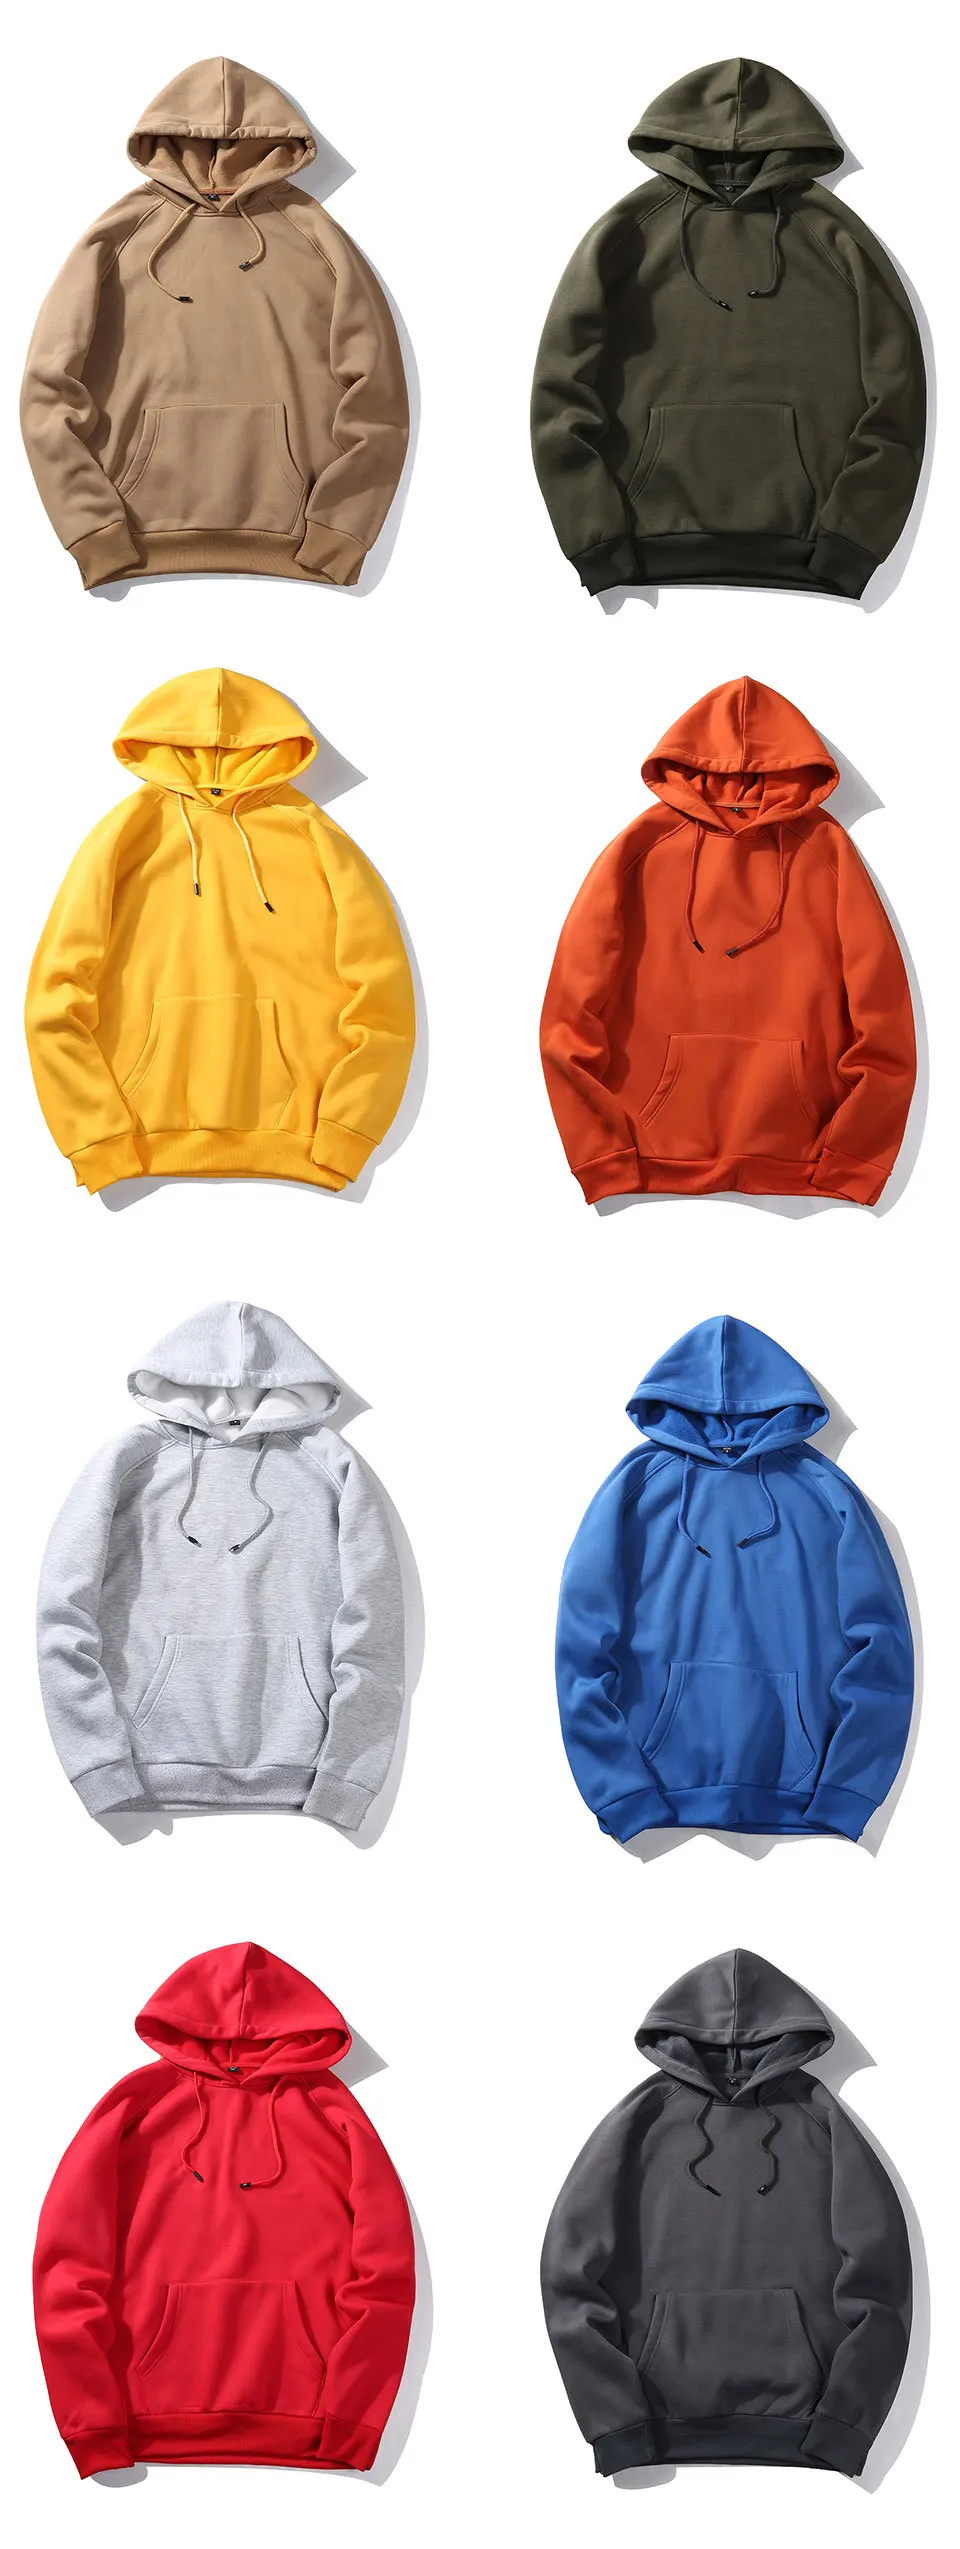 Men's Hoodies Solid Color Autumn Tops Pullovers Cotton Polyester Male Hooded Clothing Sweatshirts Man Hoodie | EU Size:S-2XL